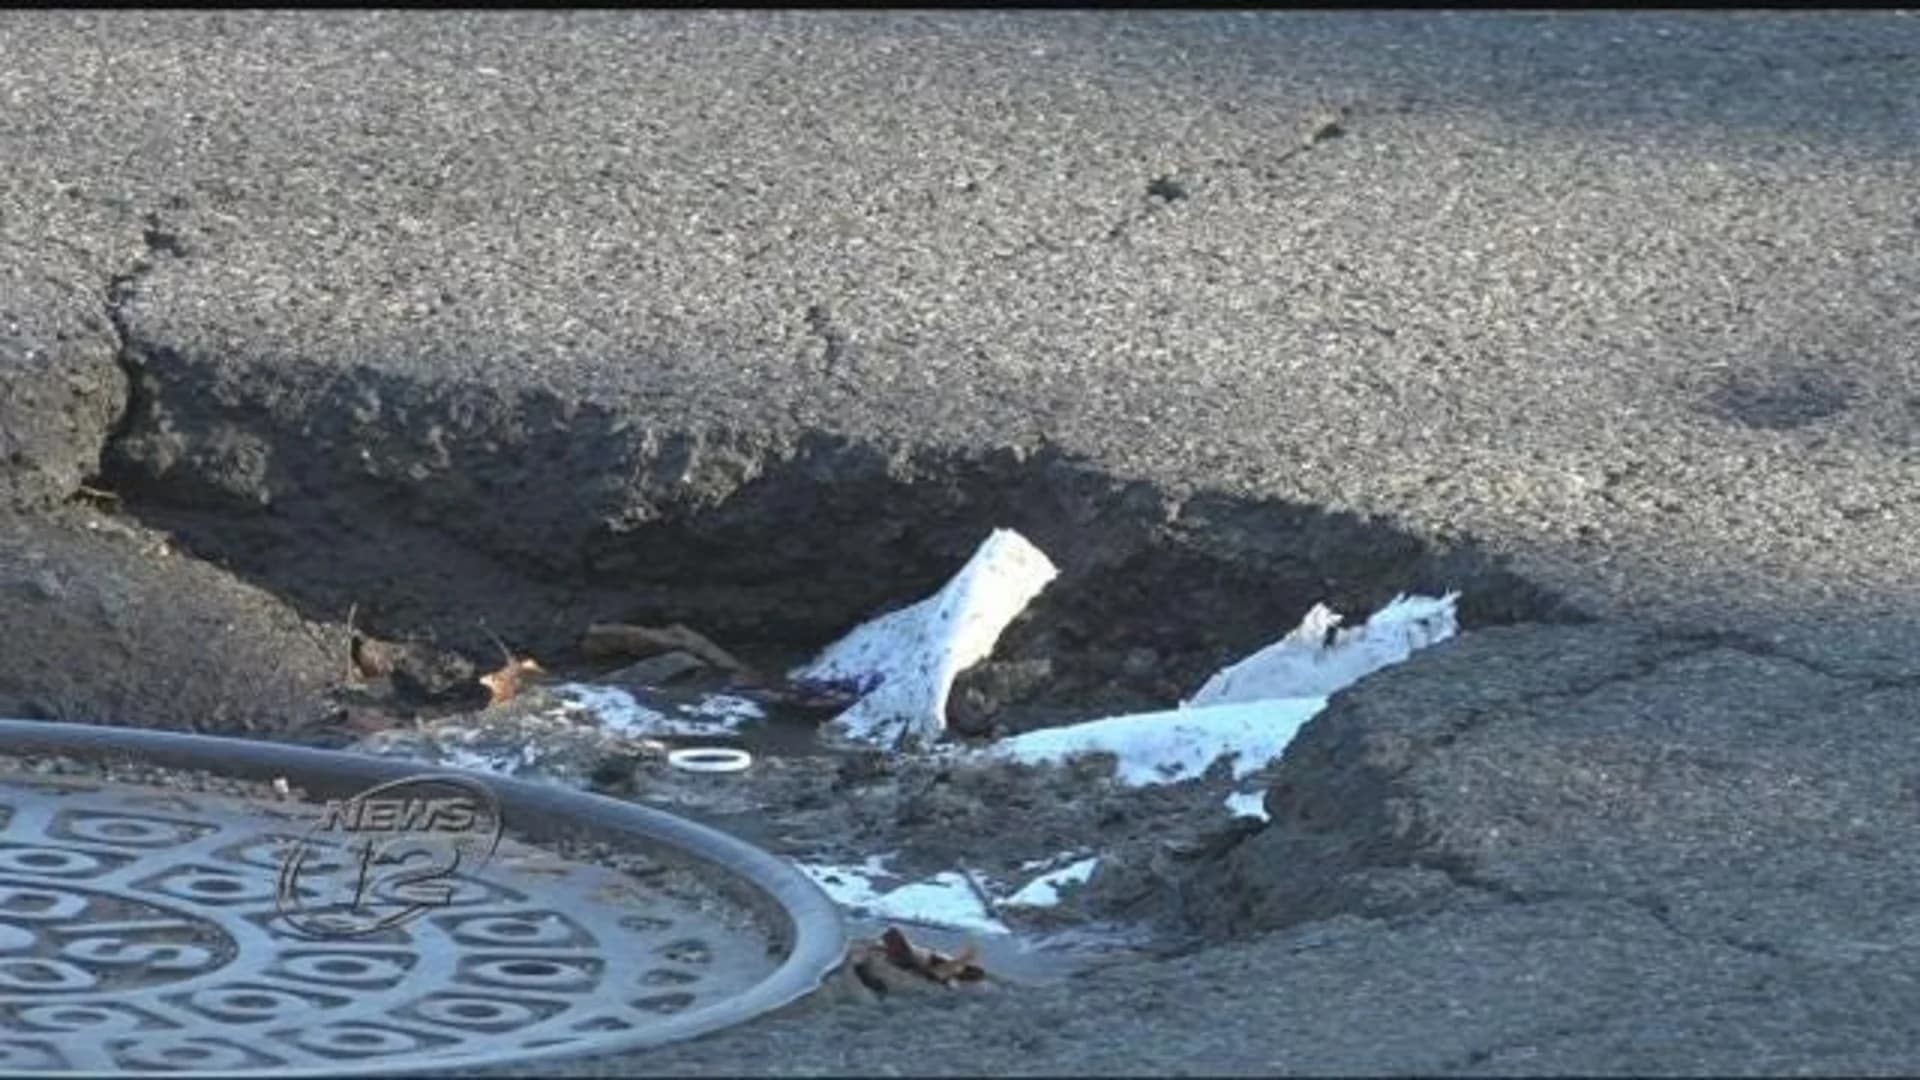 "Someone is going to die here" – Yonkers man says potholes are ticking time bombs